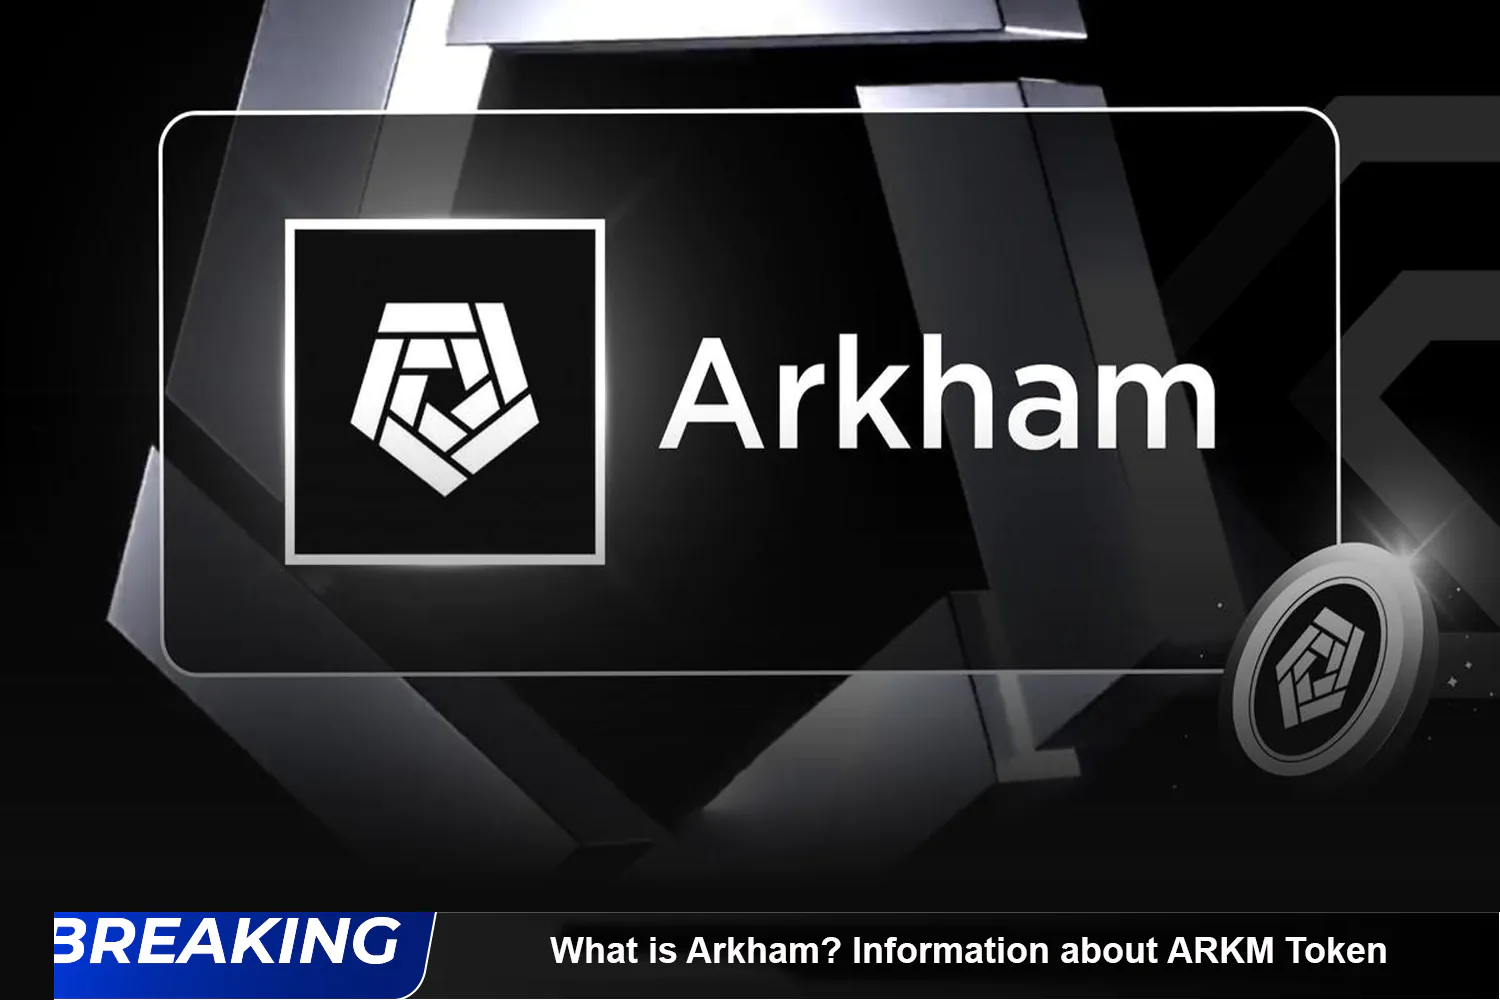 What Is Arkham Information About Arkm Token